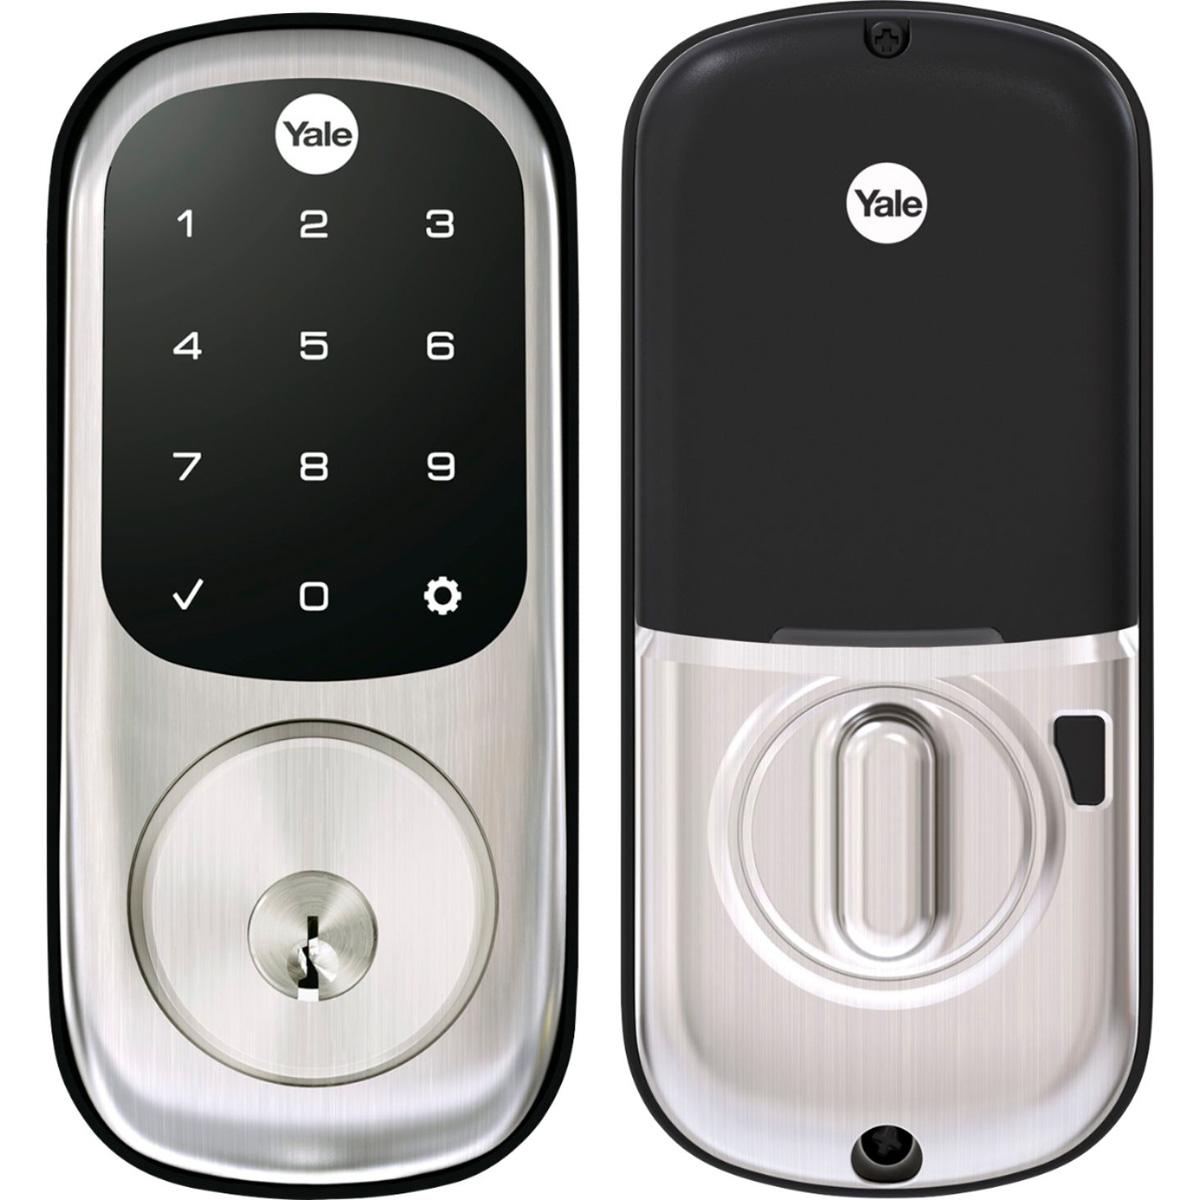 Yale Assure Lock SL Wi-Fi and Bluetooth Touchscreen Deadbolt for $149.99 Shipped